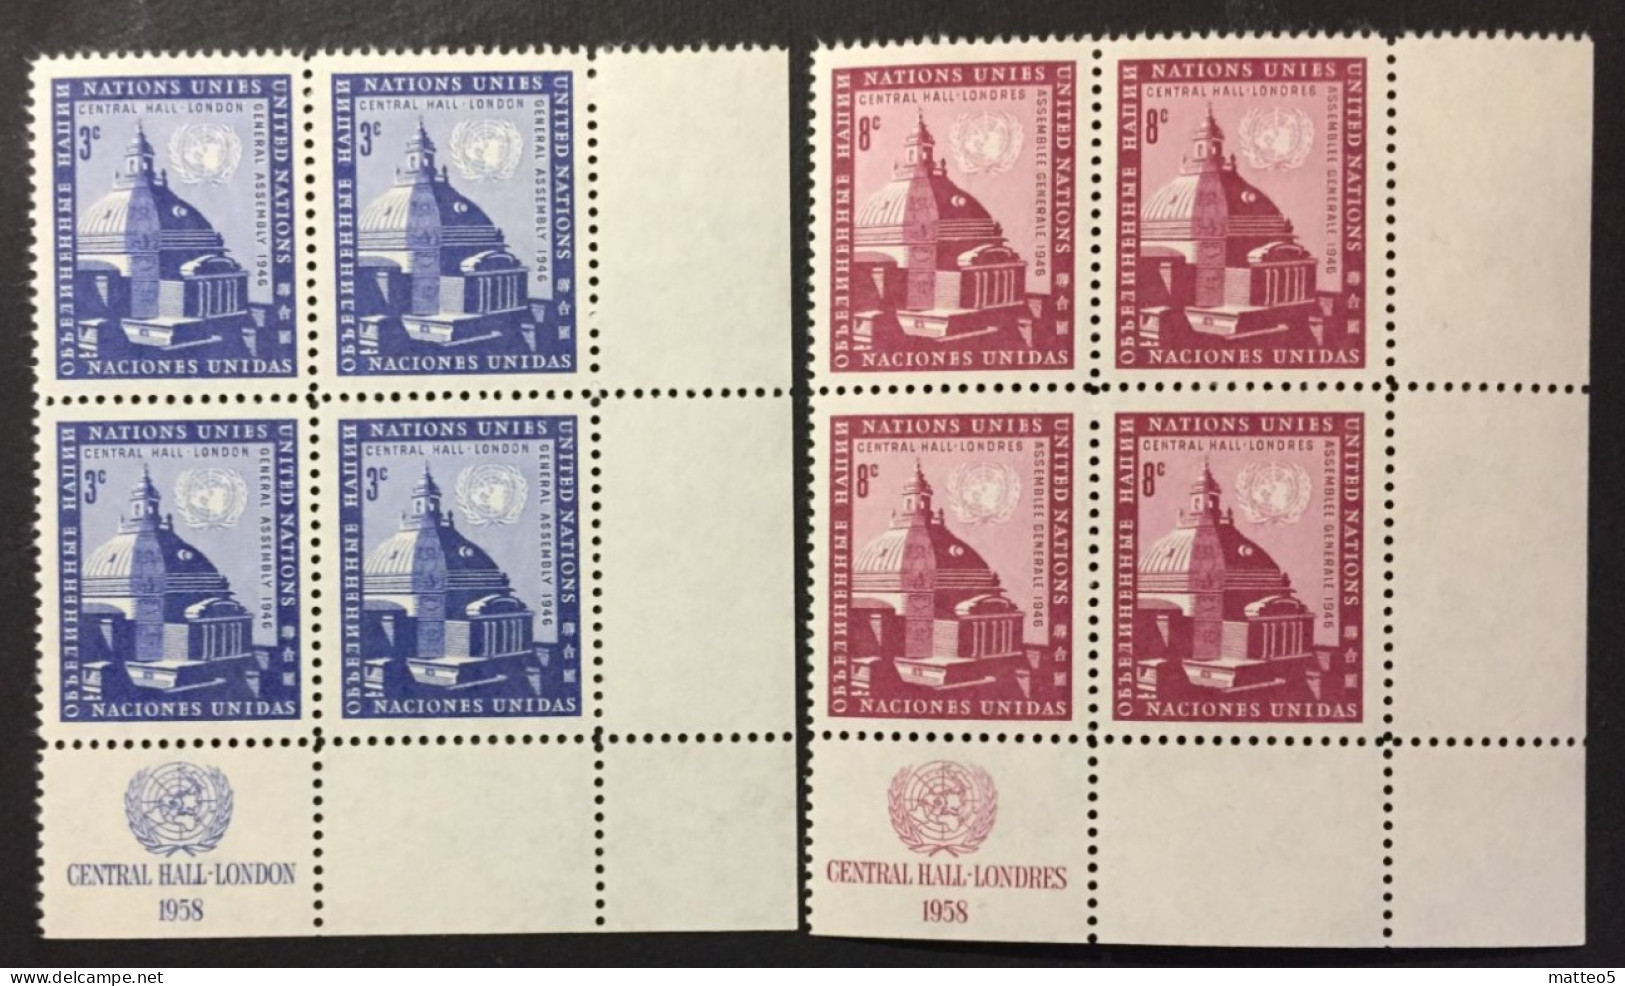 1958 - United Nations UNO UN ONU - General Assembly, UNN Assembly Buildings - 2 X4 Stamps Unused - Ongebruikt